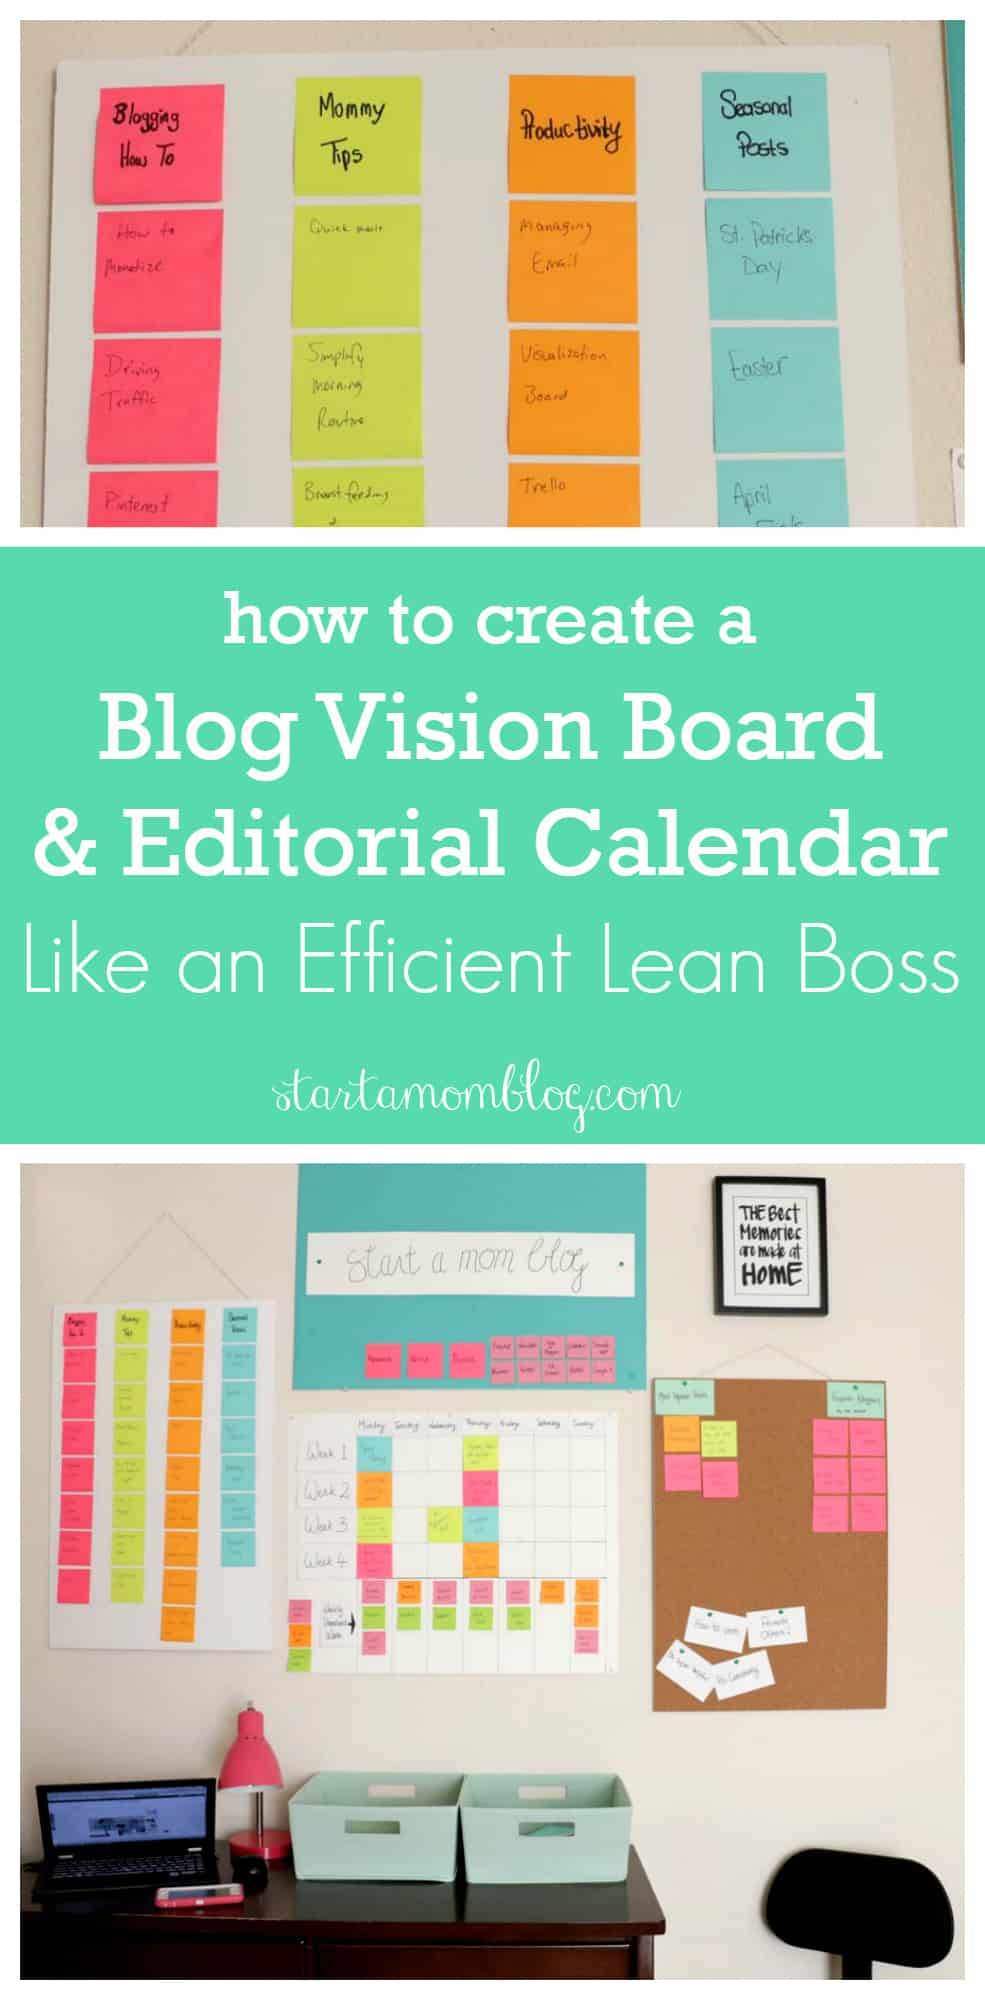 How to create a blog vision board and editorial calendar like an efficient lean boss